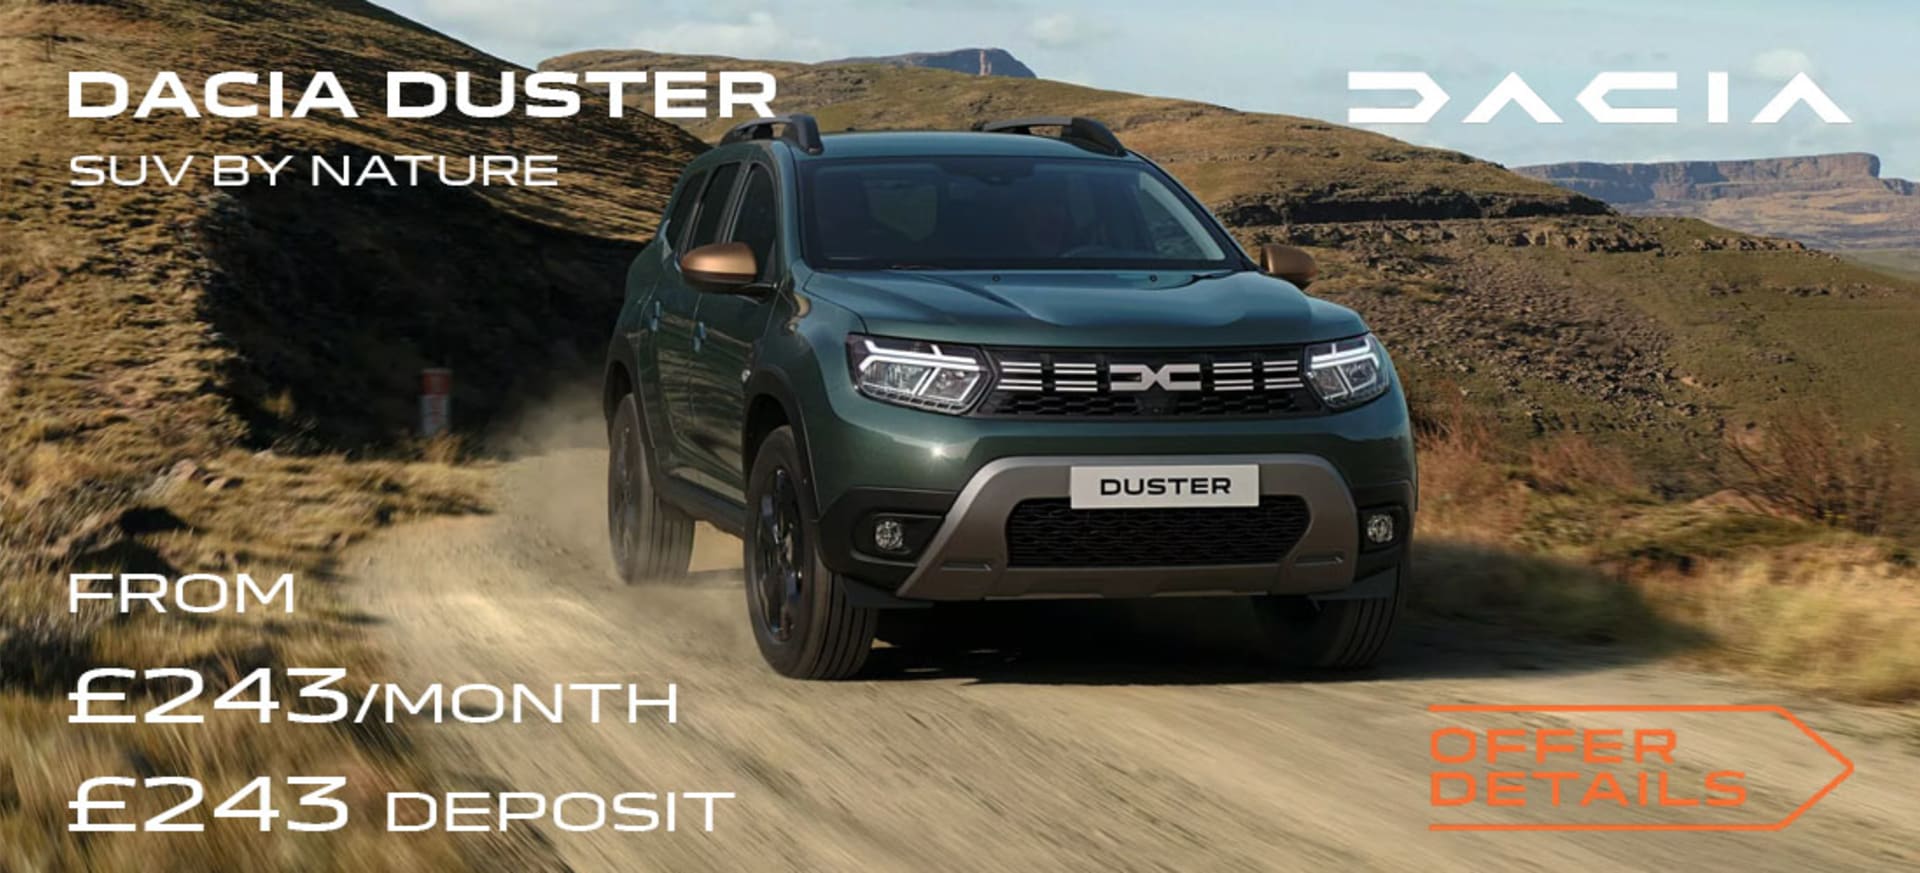 Dacia Duster Offers